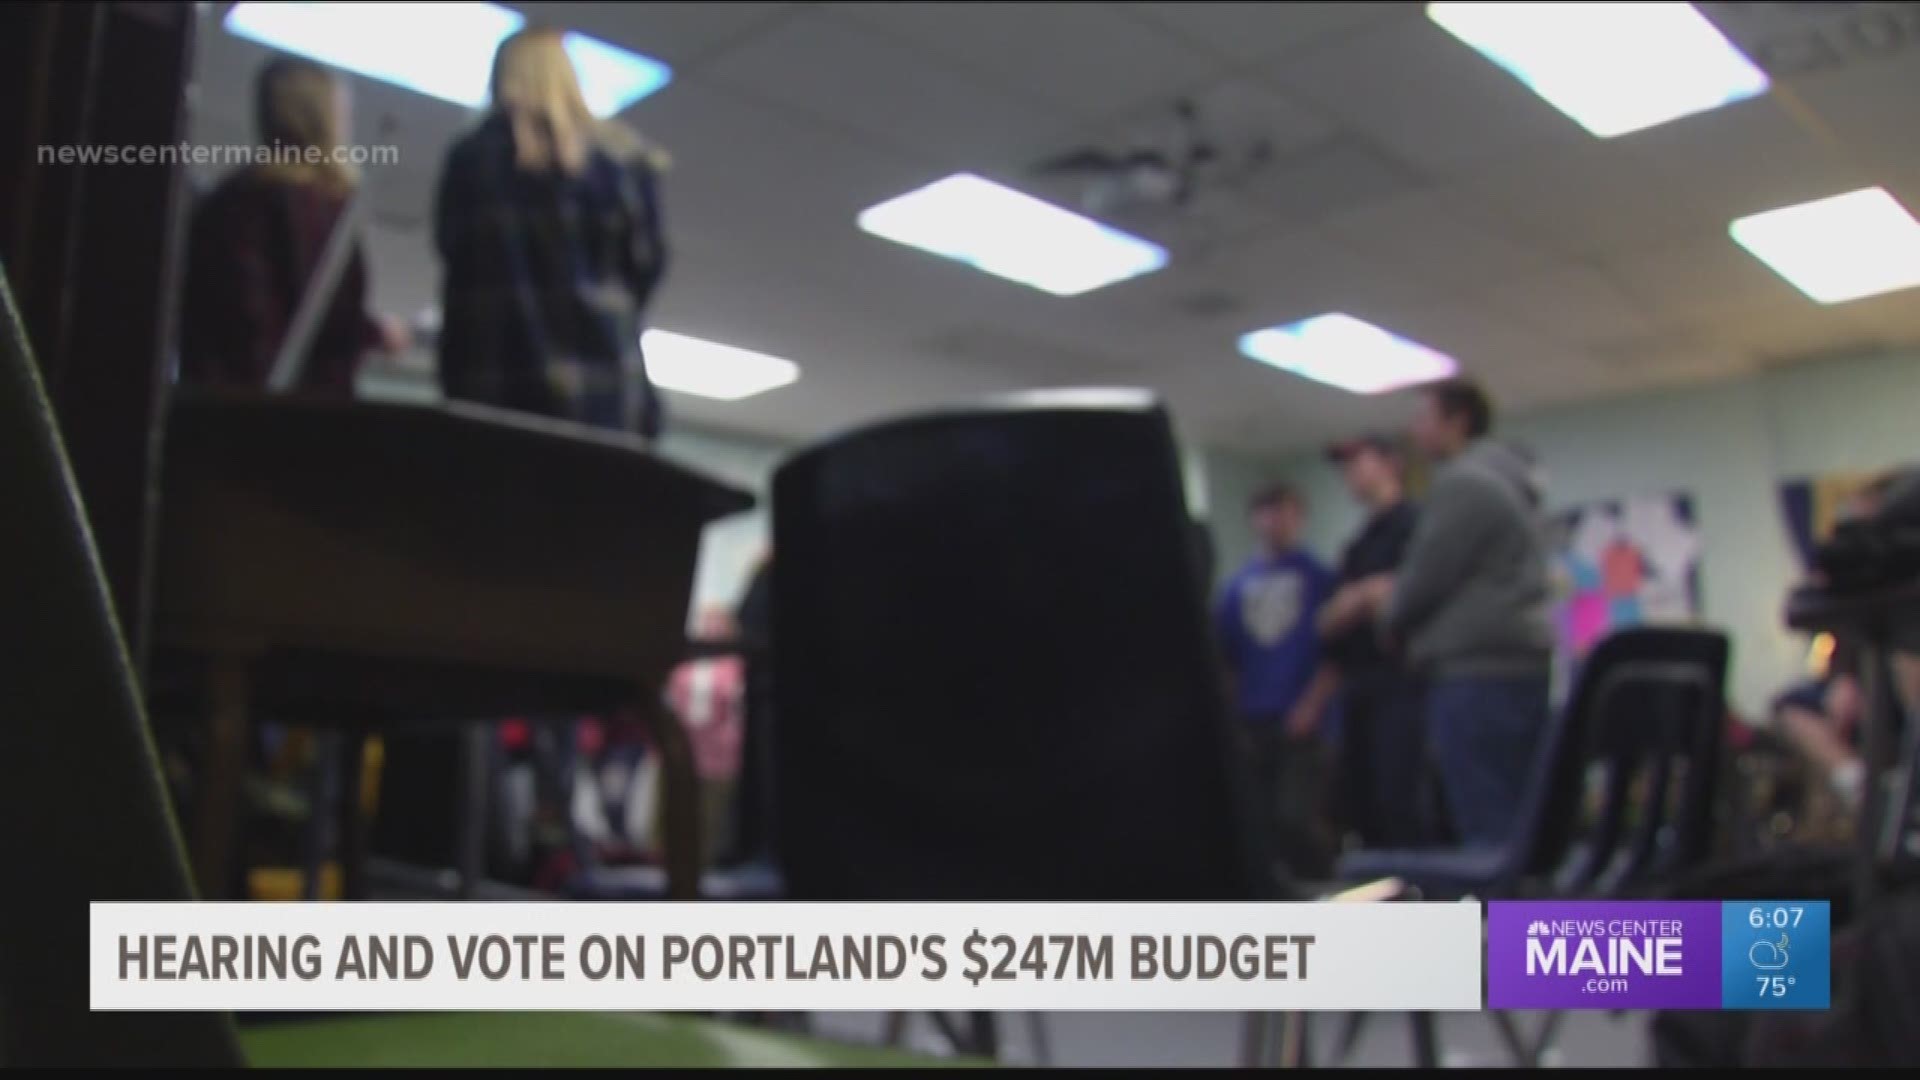 Hearing and vote on Portland's $247M budget